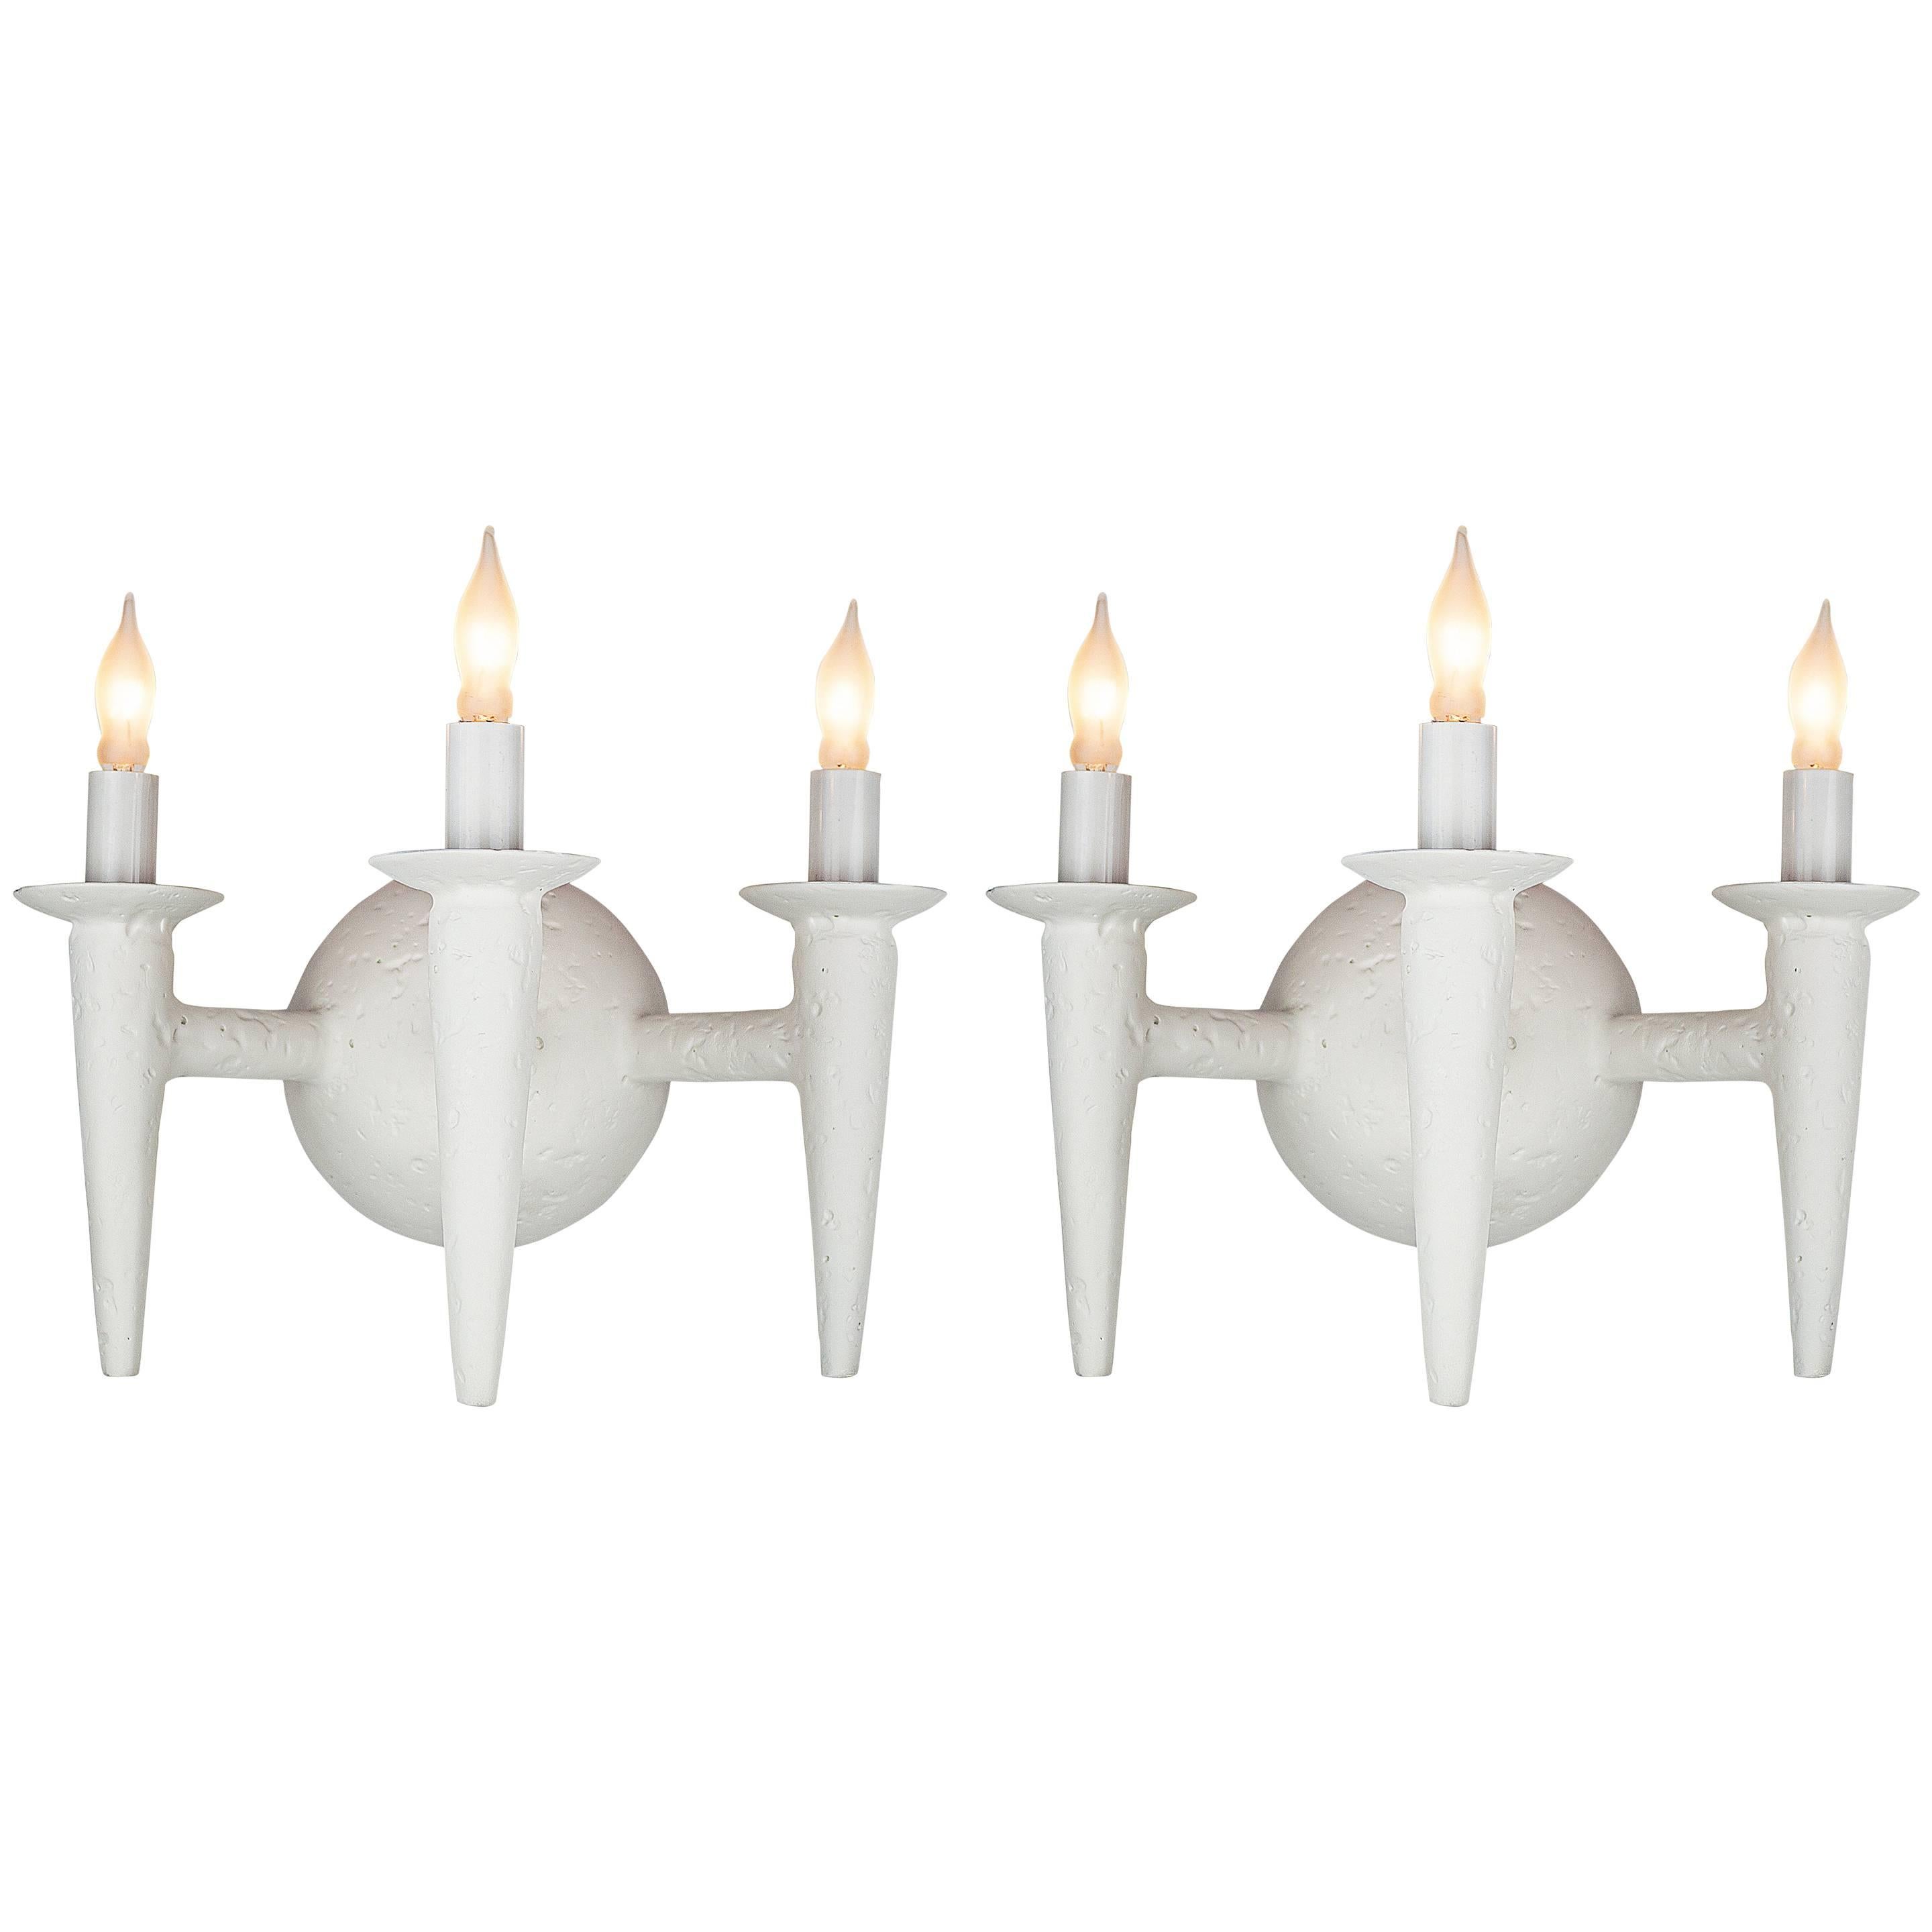 Pair of Avron Sconces by Bourgeois Boheme Atelier For Sale